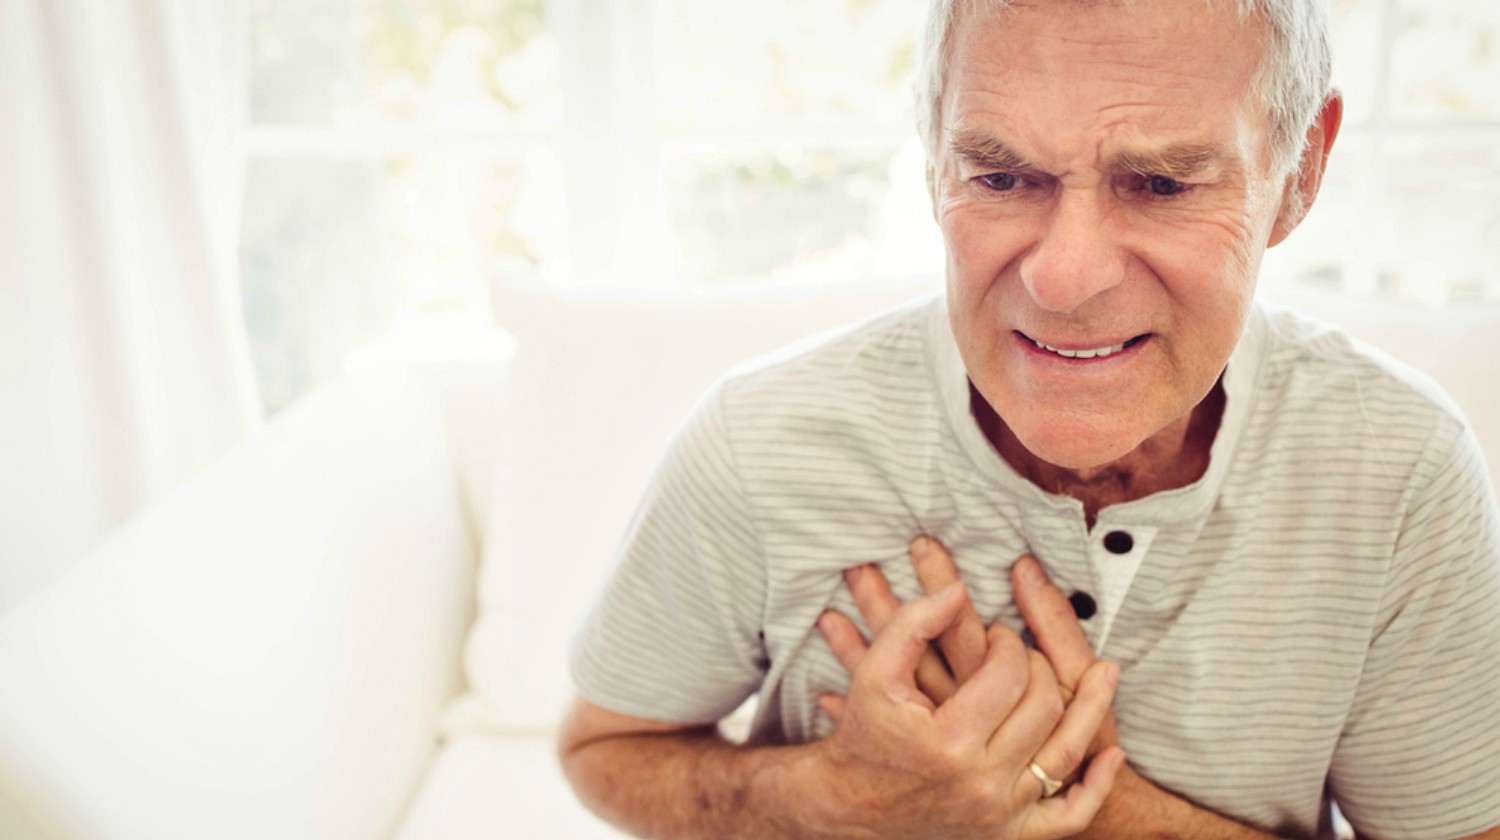 Feature | Old man holding his chest having heart attack | Heart Attack Signs You Should Know To Survive When You Are Alone